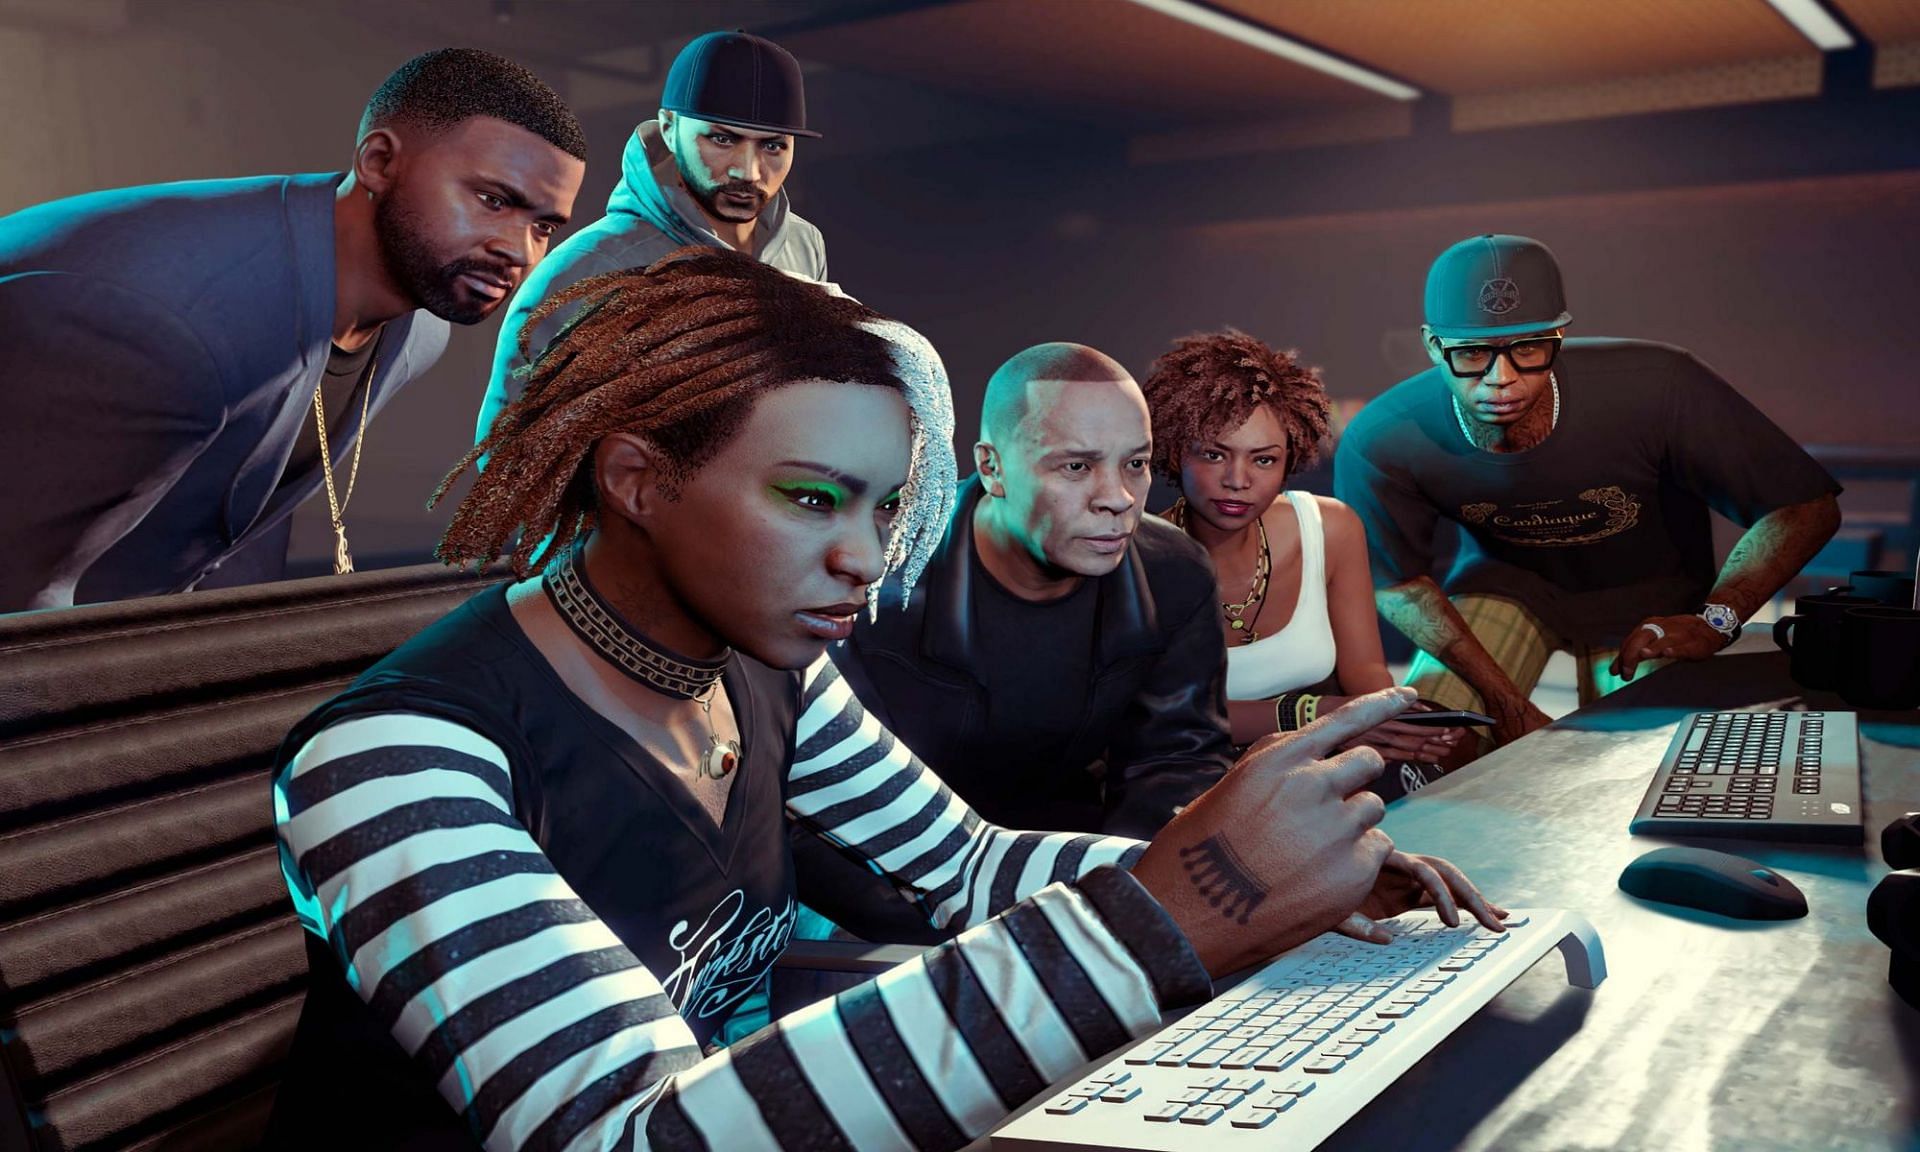 The Contract is a very popular update for GTA Online (Image via Rockstar Games)